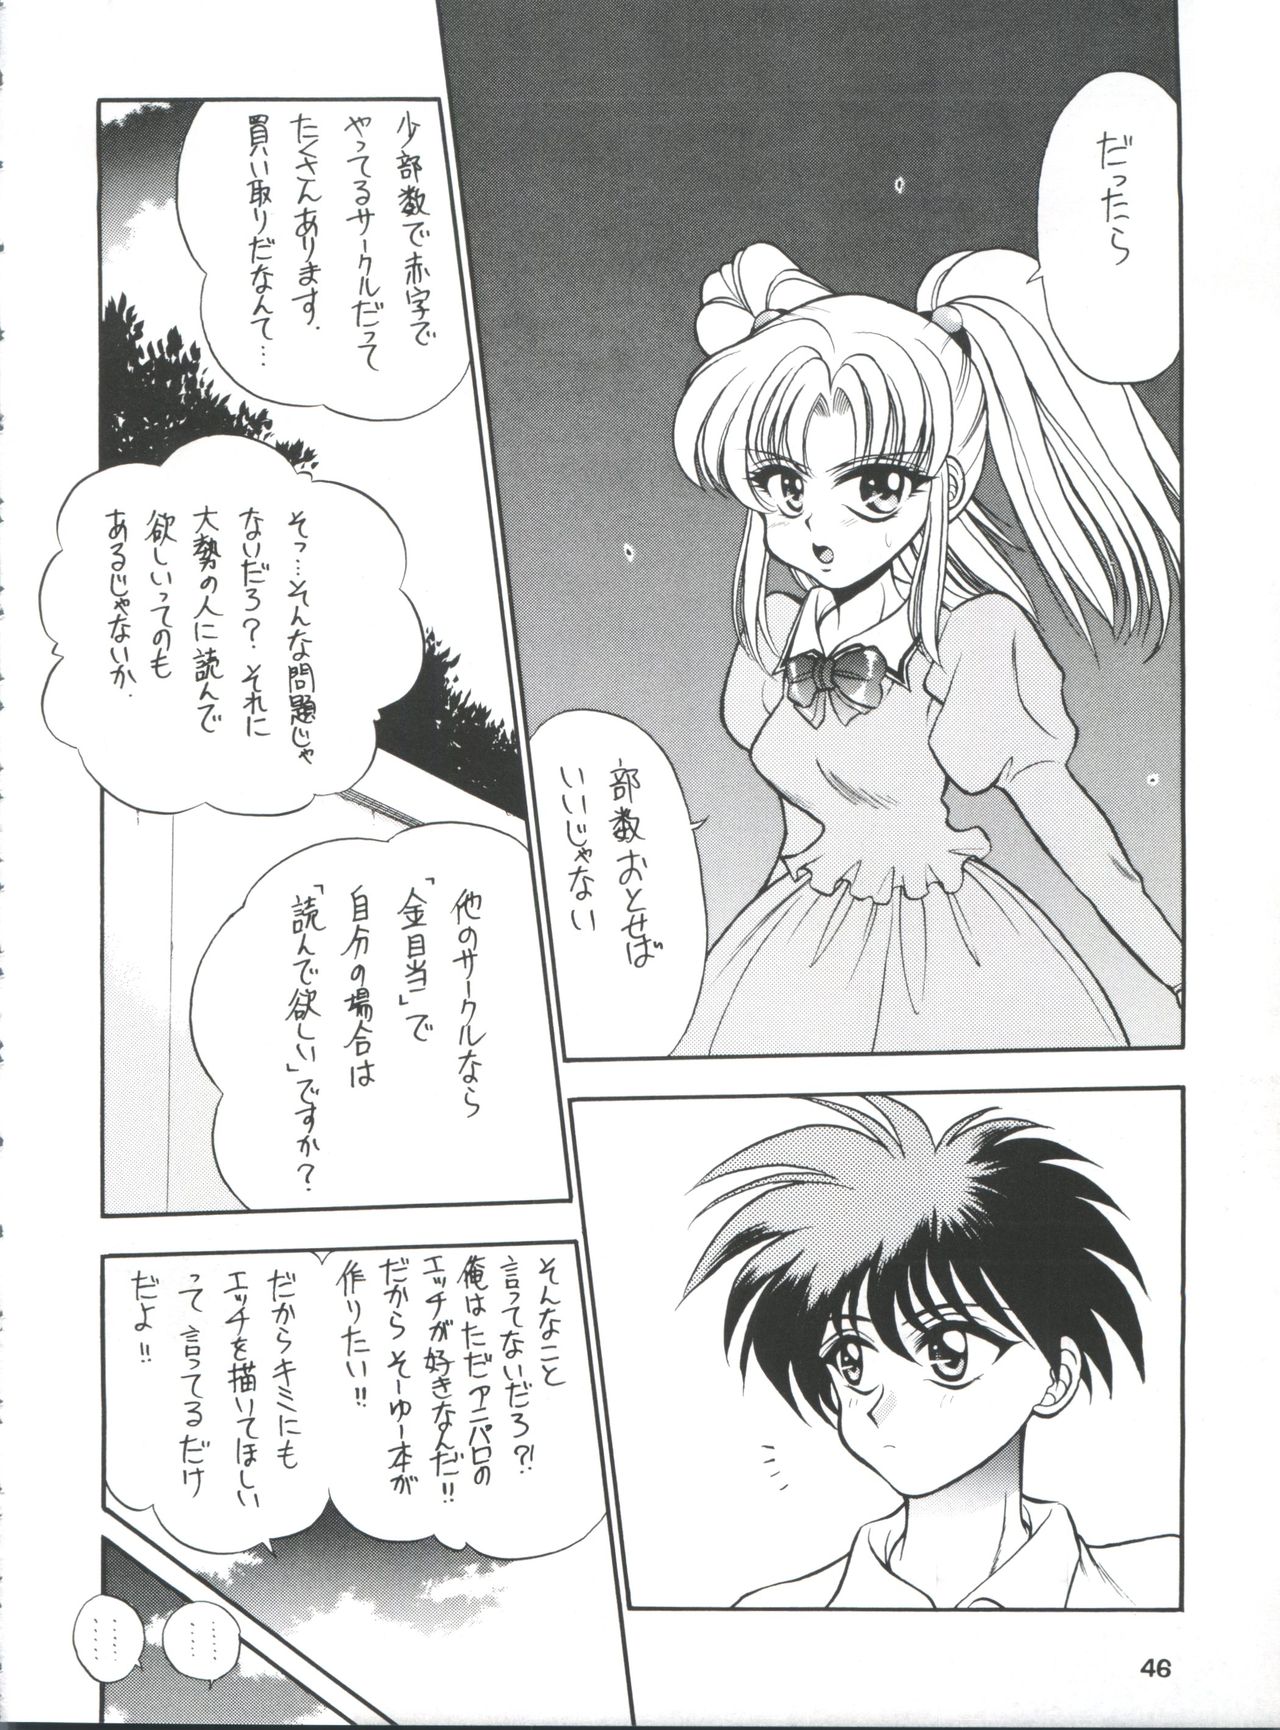 [DREAM HOUSE (Various)] PROMINENT 11 (Nadesico) page 46 full